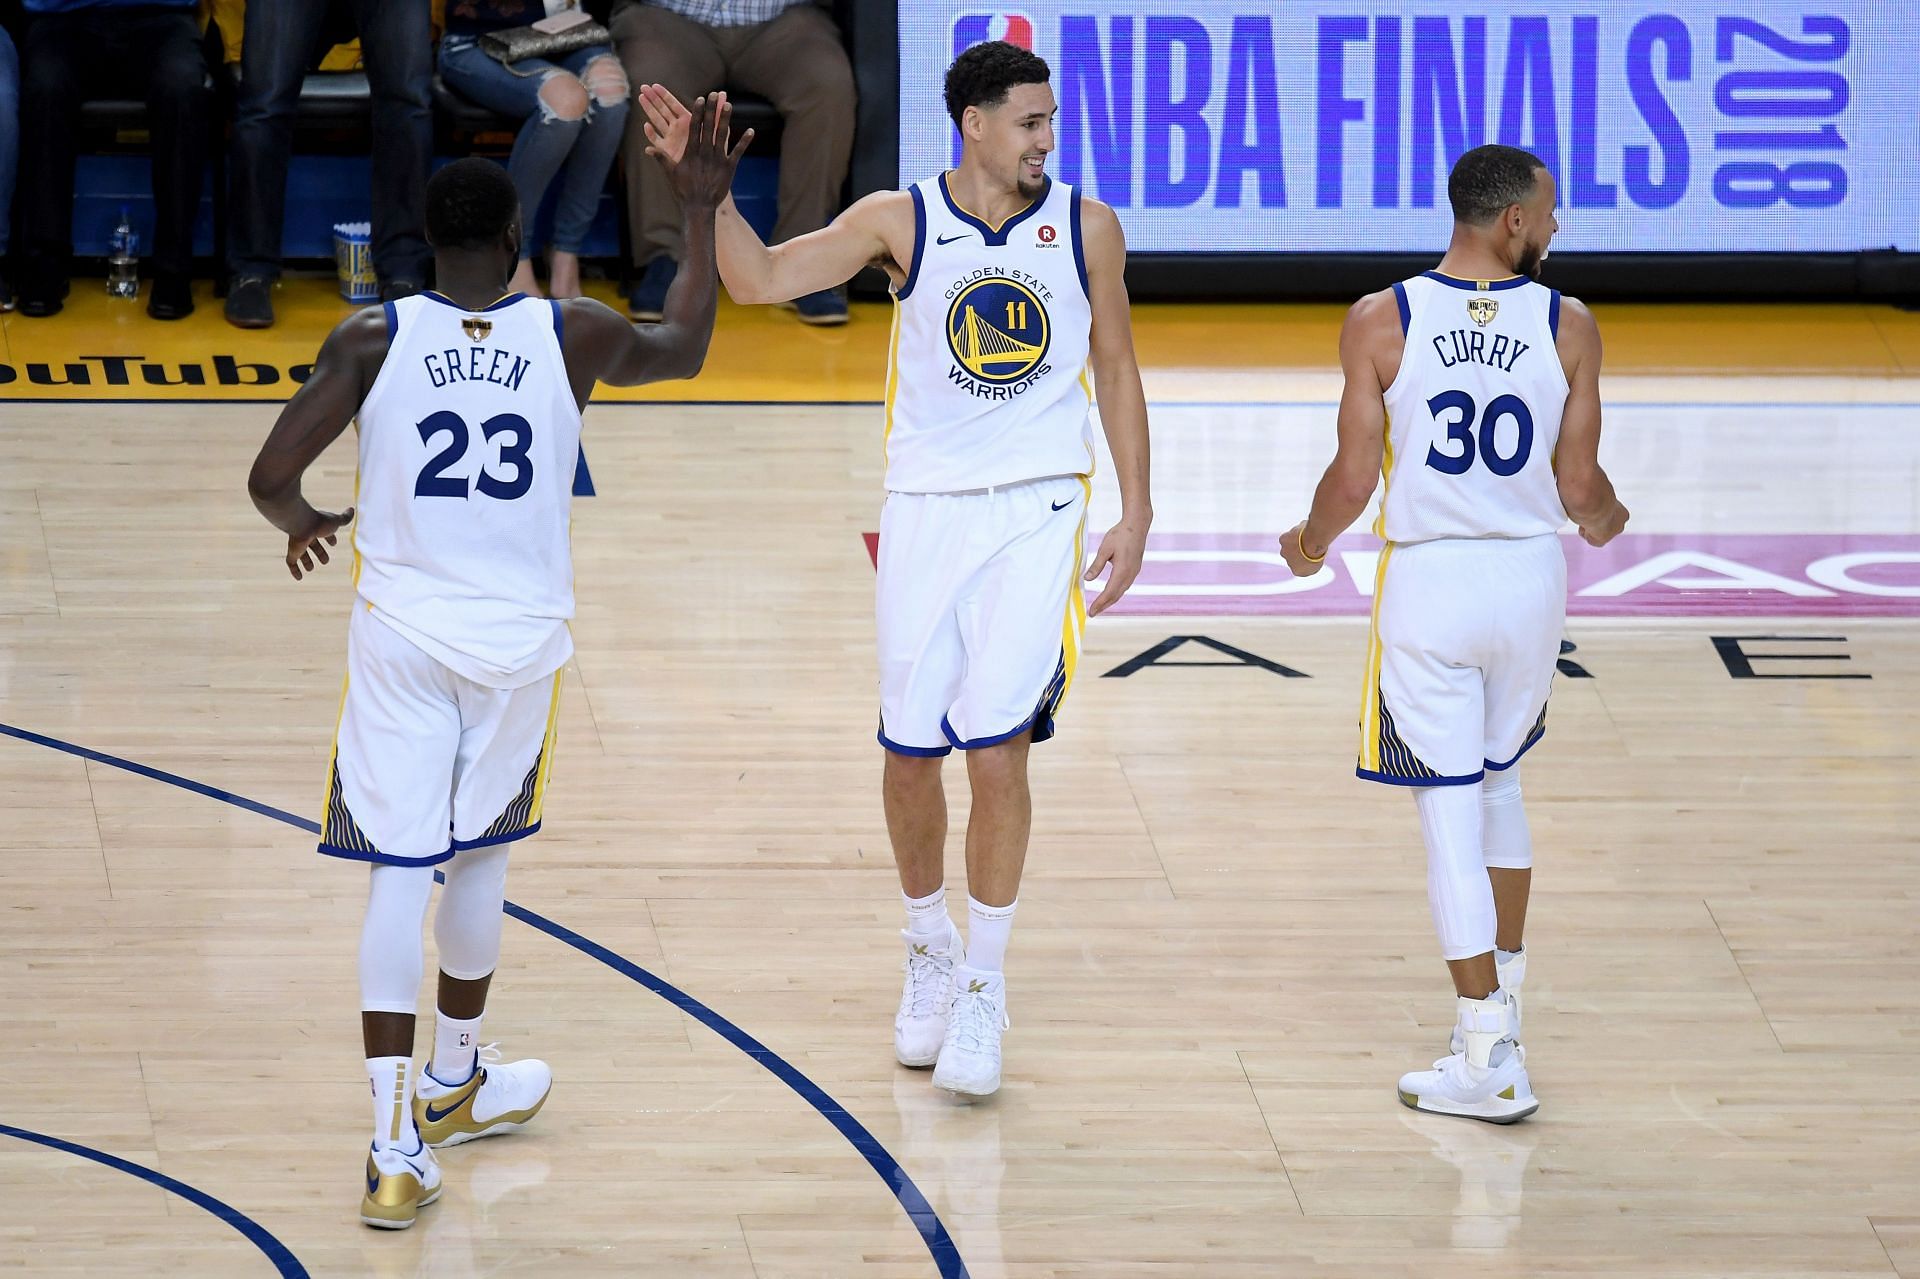 Draymond Green, Klay Thompson and Steph Curry of the Golden State Warriors in the 2018 NBA Finals